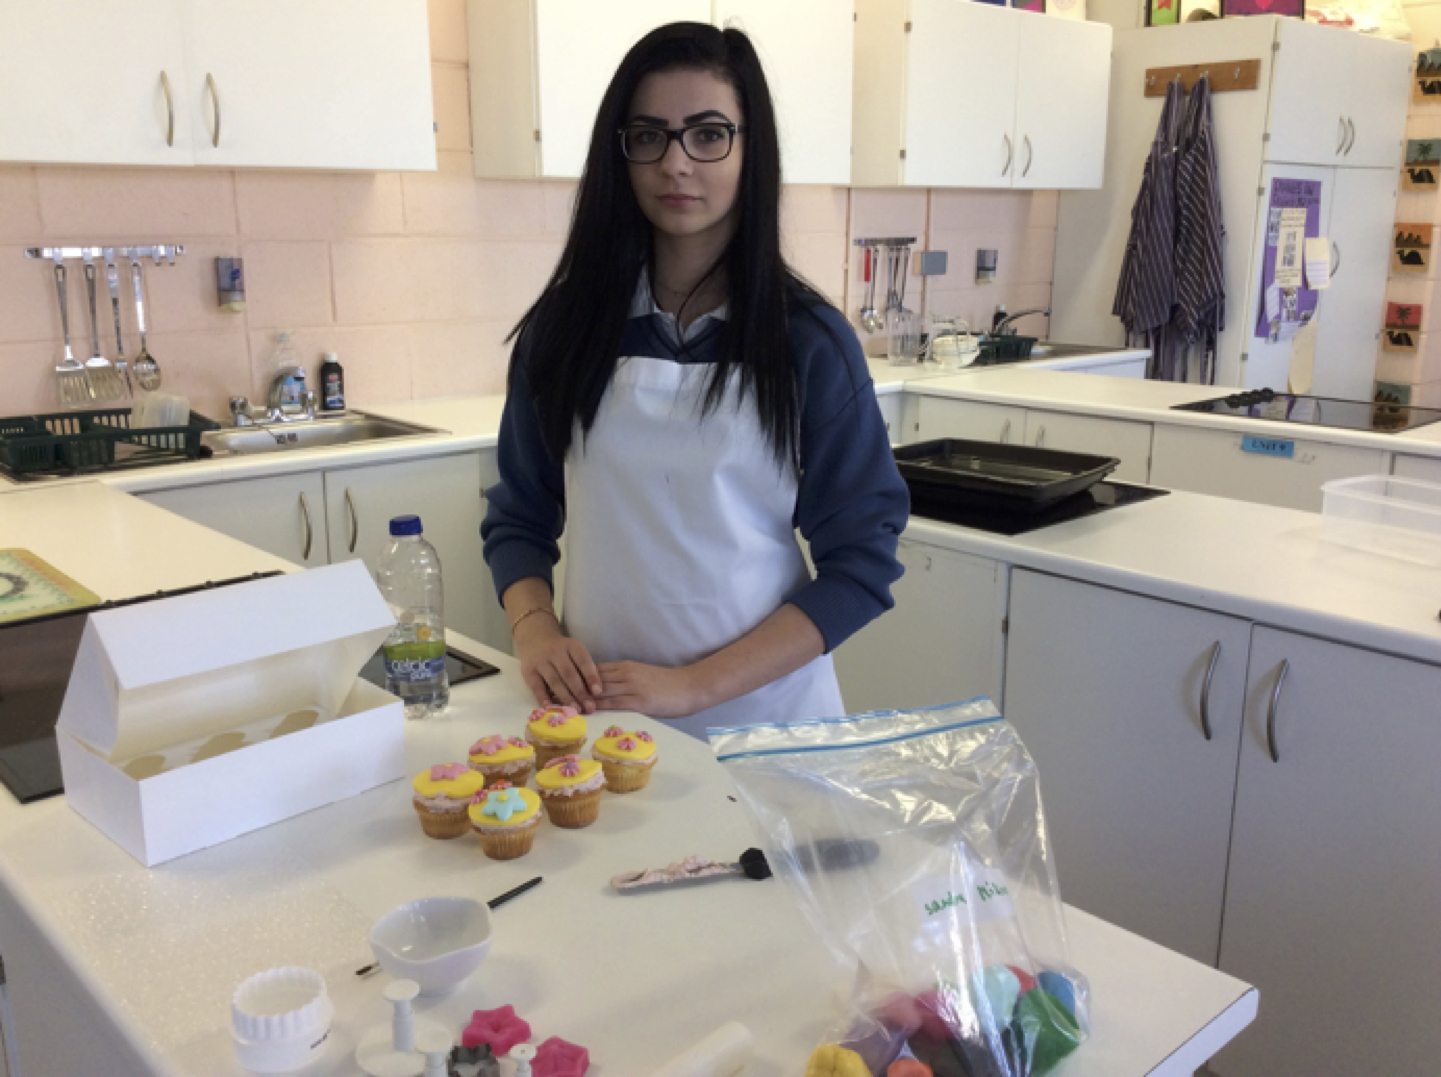 May 2017: Desmond College's Rang Fintan decorated cupcakes as part of the demonstration with Victoria from BakeYouSweet